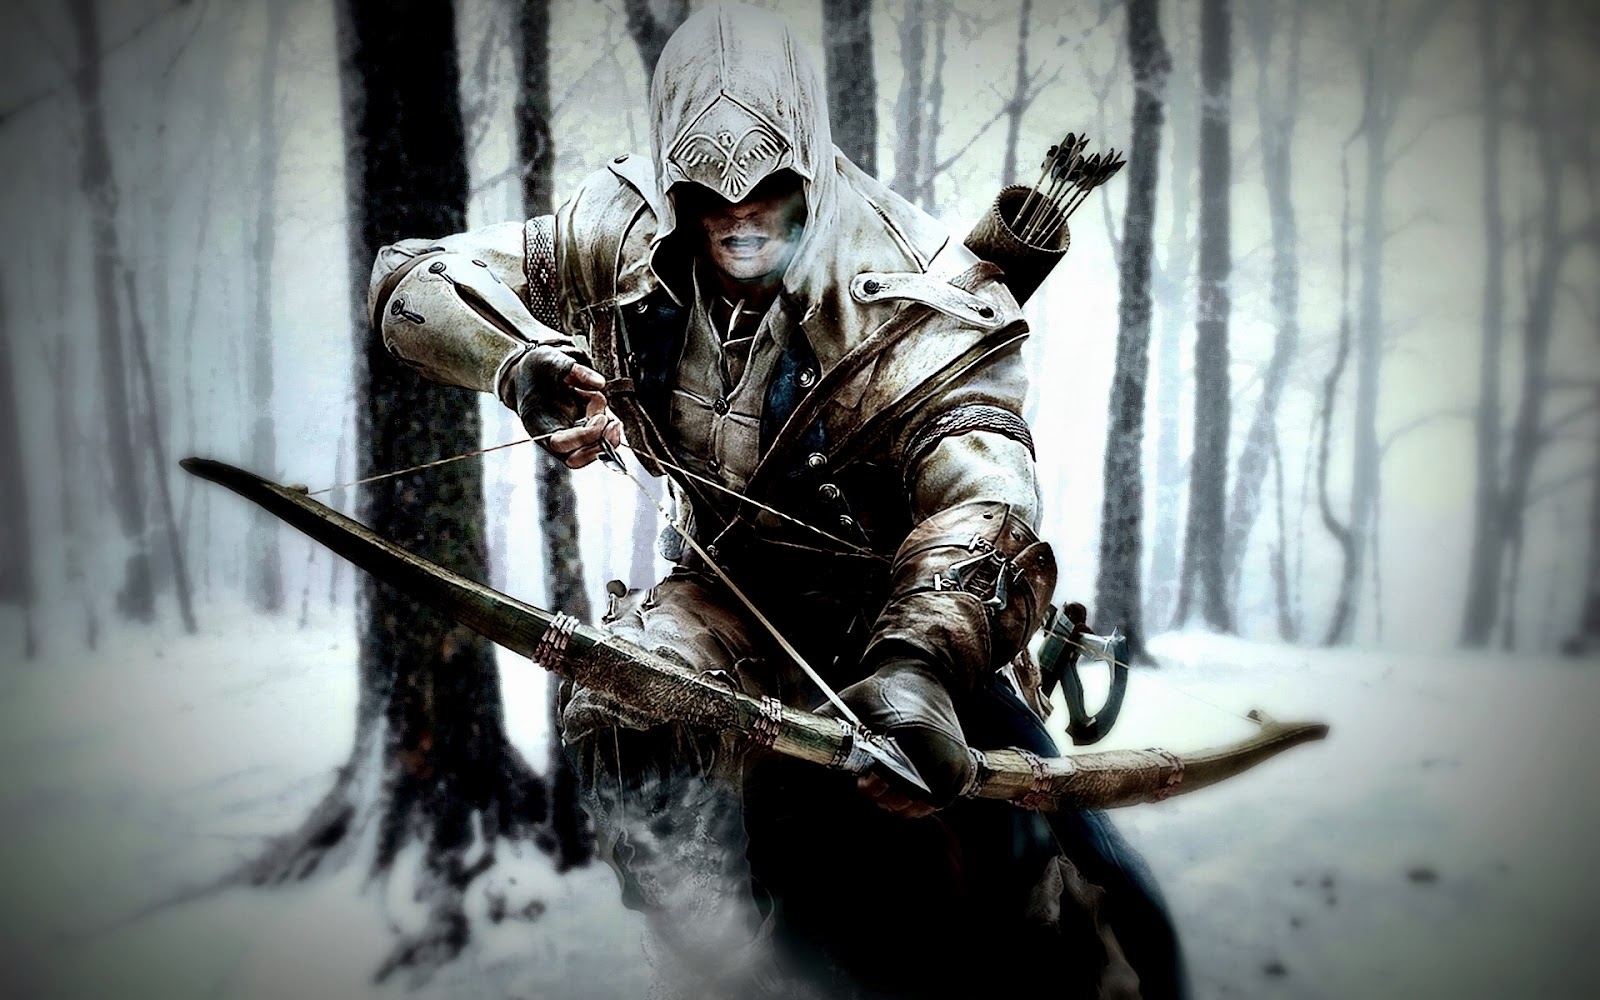 Game Assassin Creed III For Nokia Asha 200 202 300 303 305 306 308 311 500 501 502 503 504 505 506 Java Touch Phone